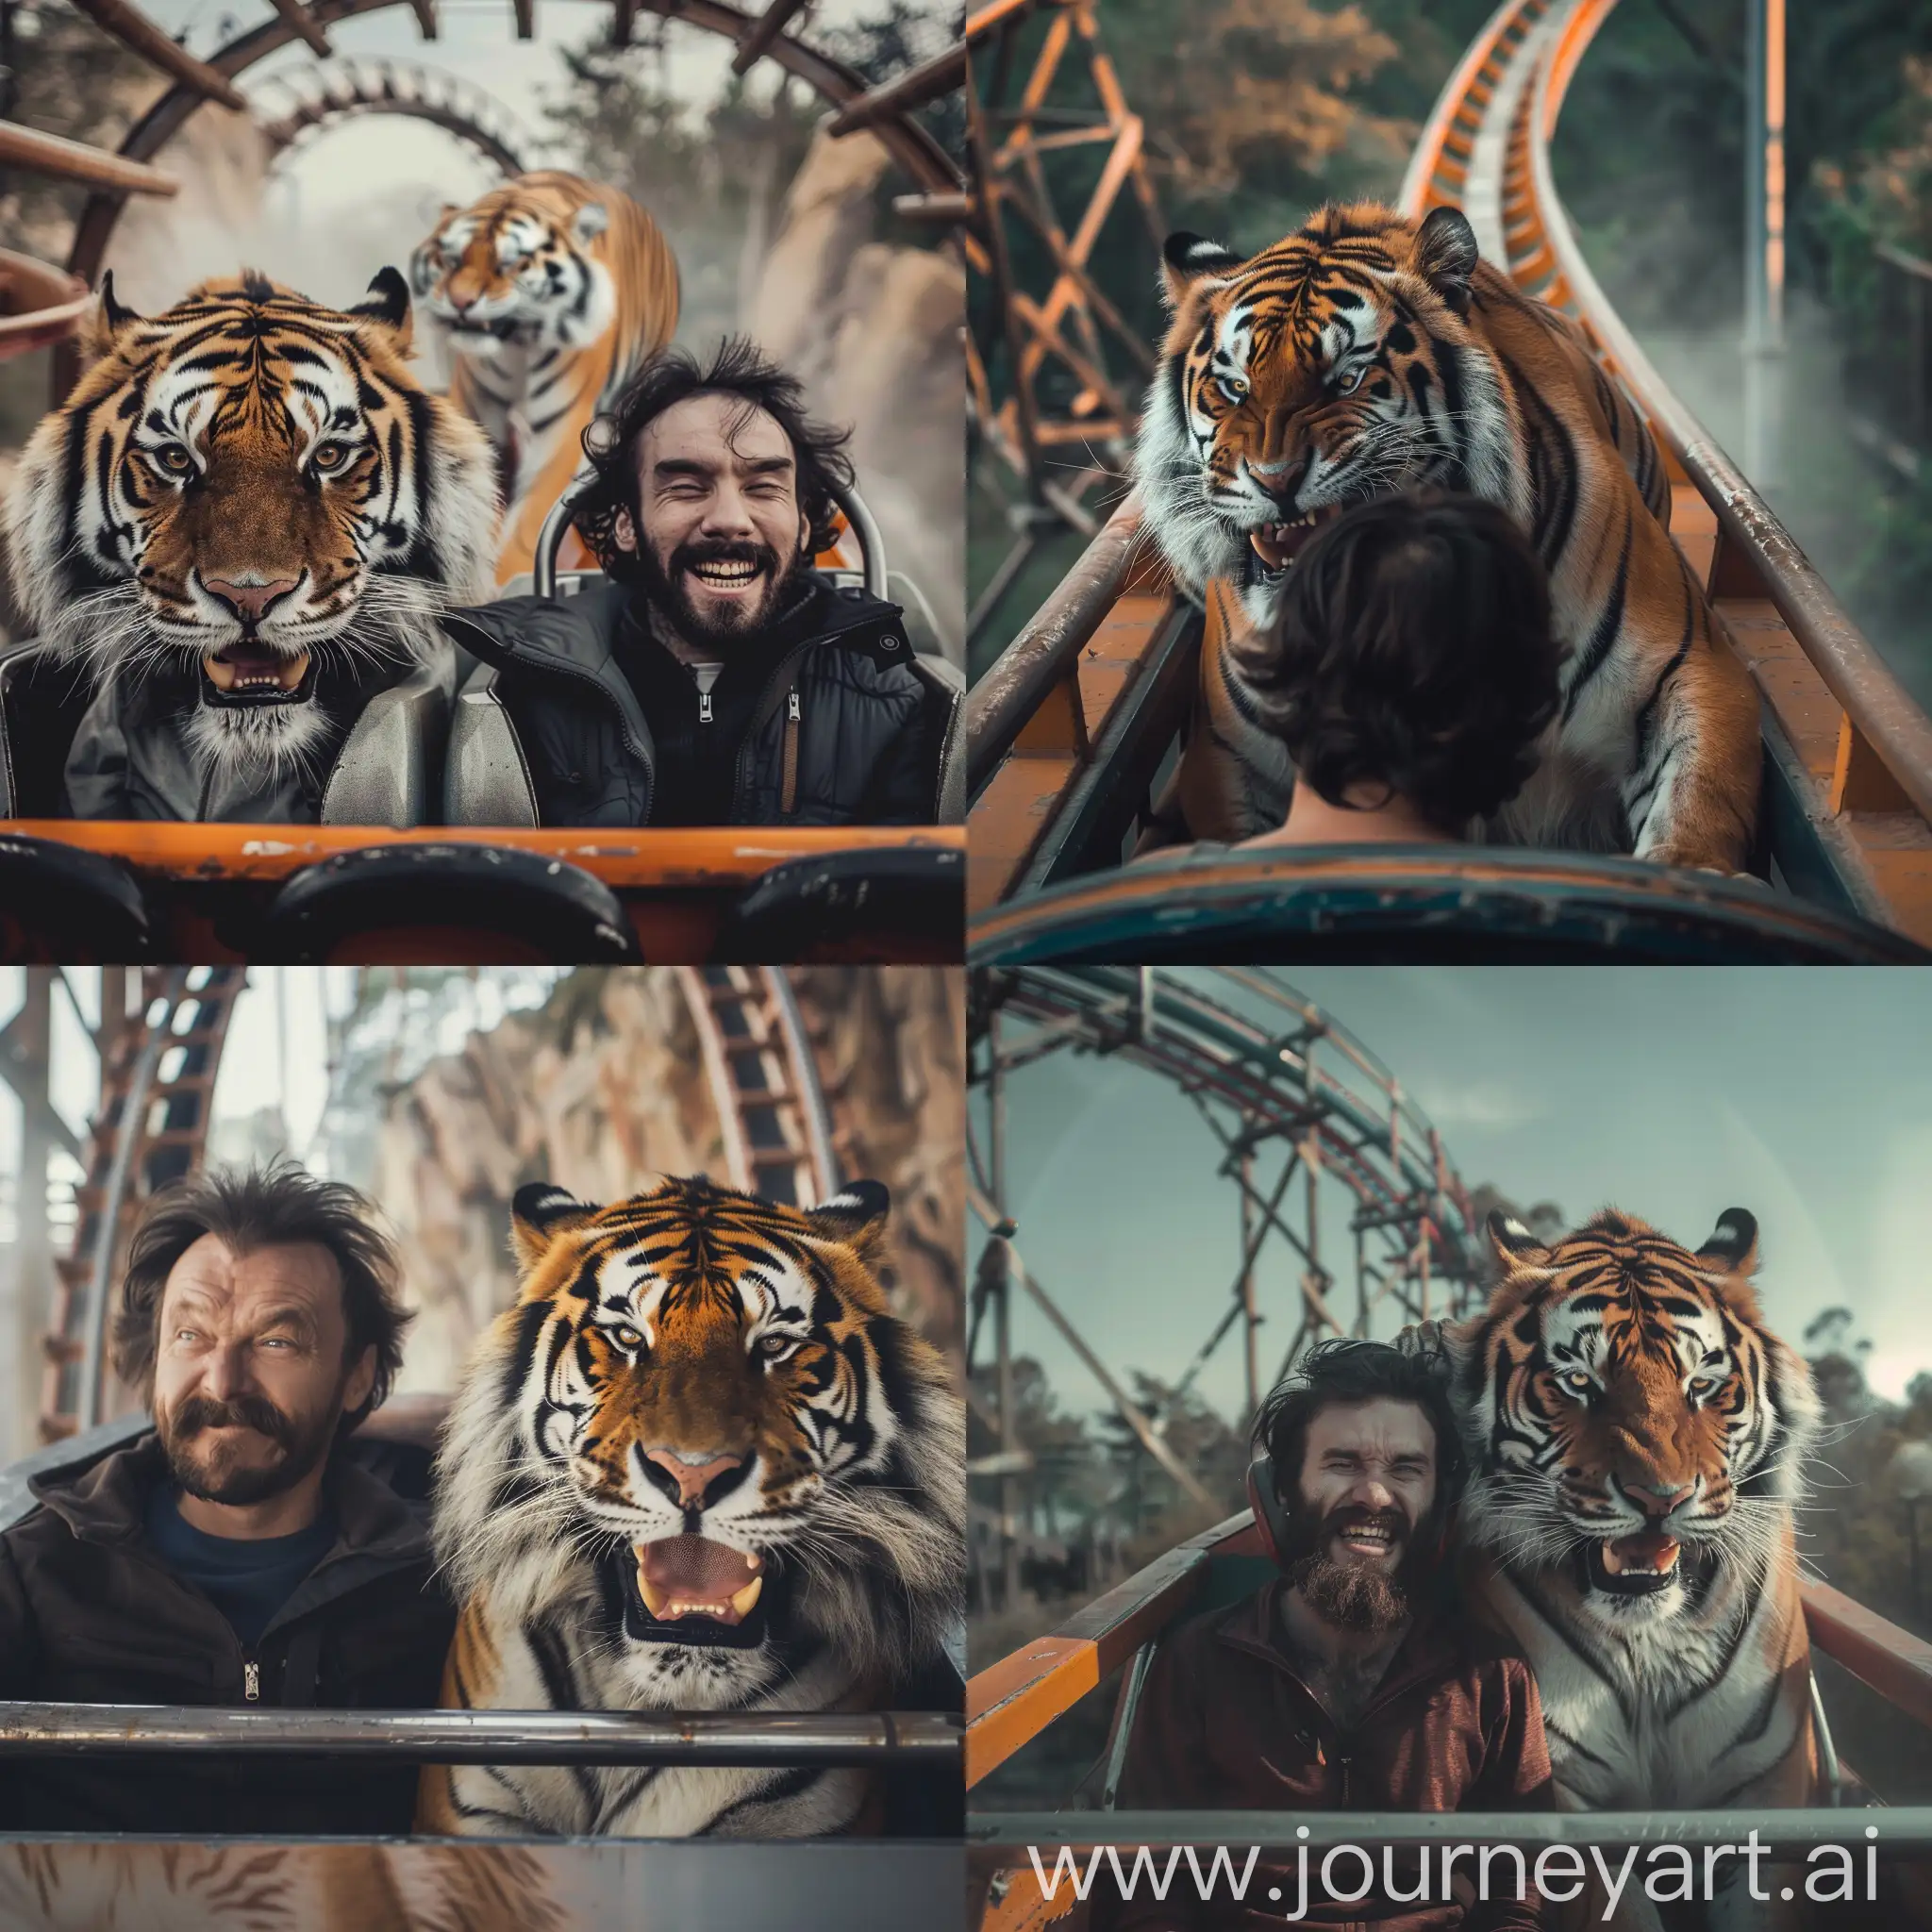 Scared man sitting in a rollercoaster next to a smiling tiger